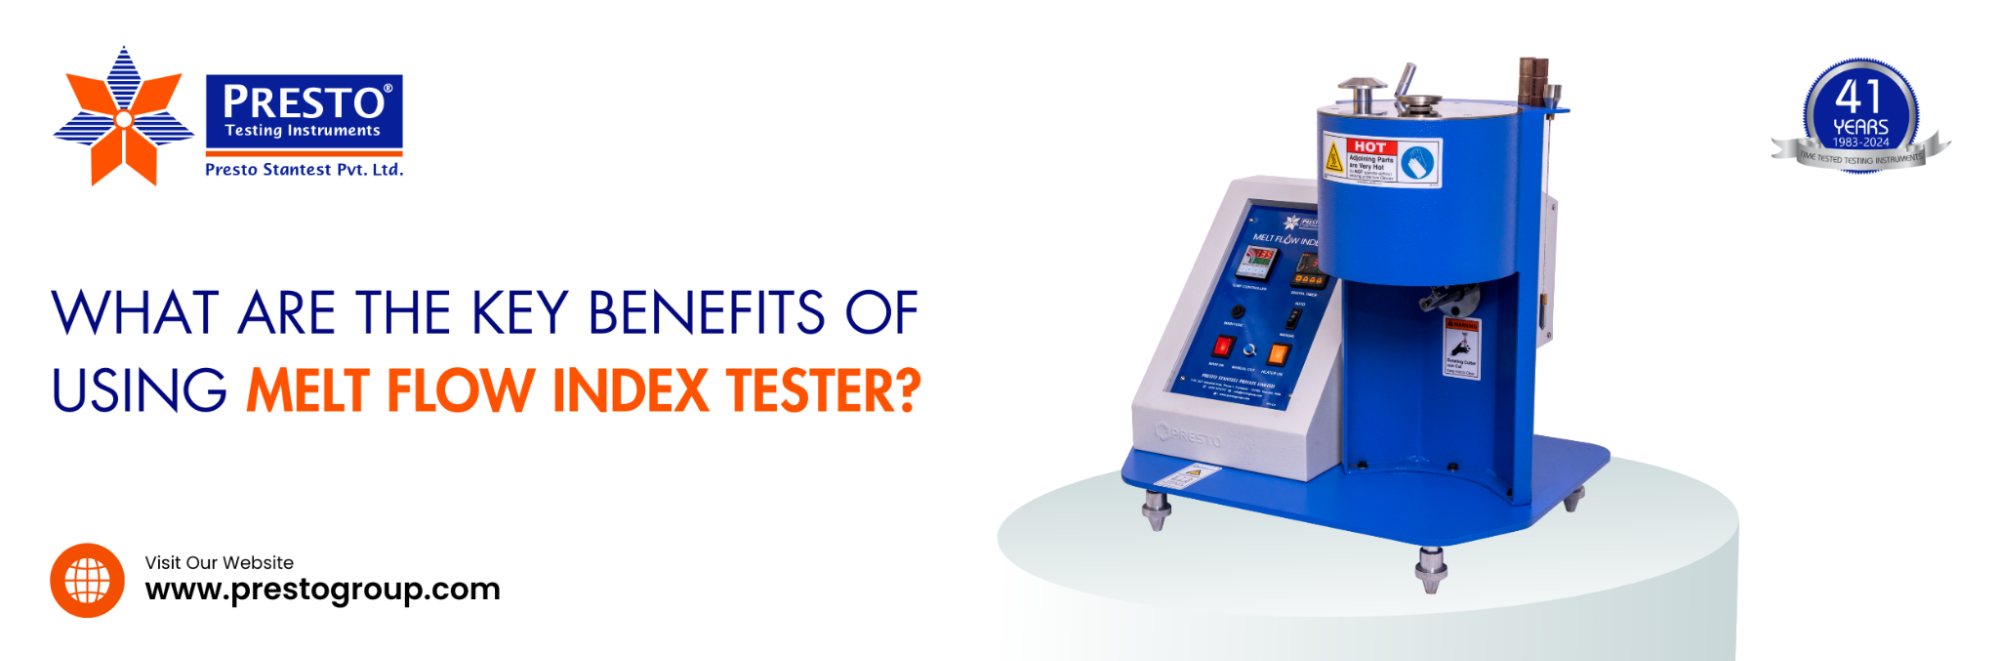 What Are the Key Benefits of Using Melt Flow Index Tester?